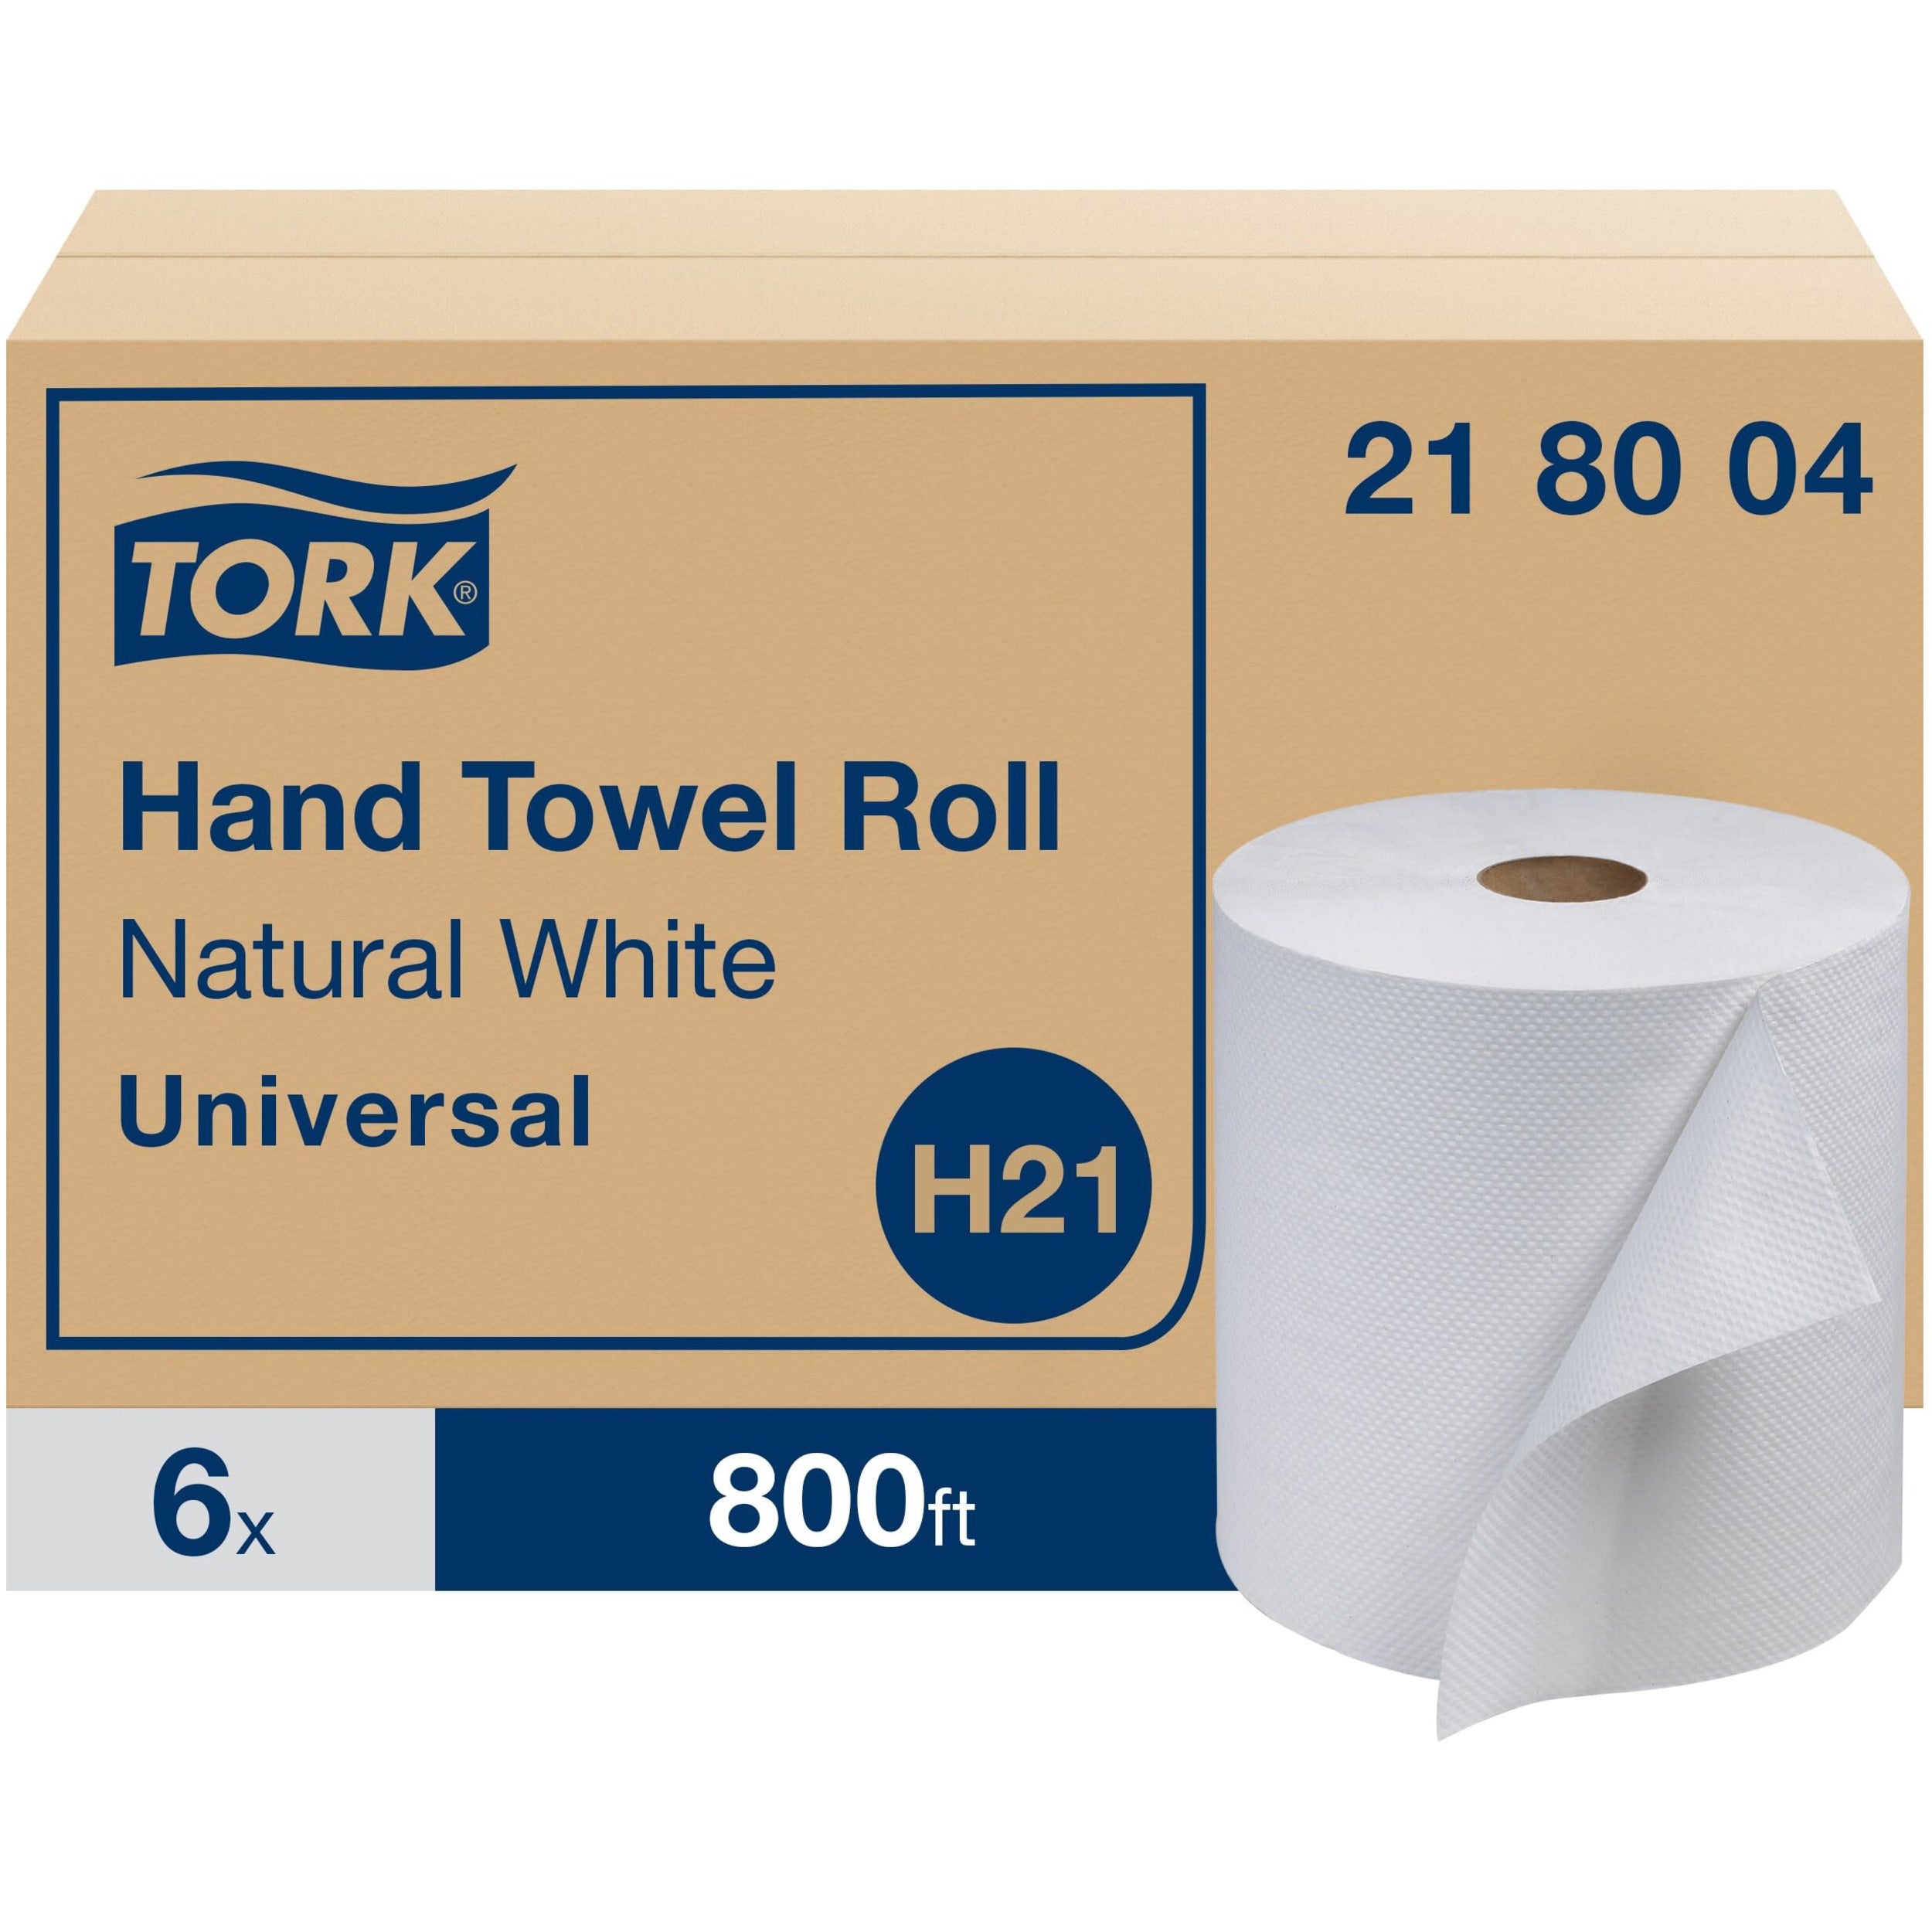 tork-universal-hand-towel-roll-1-ply-790-x-800-ft-790-roll-diameter-white-paper-embossed-absorbent-long-lasting-for-hand-6-roll_trk218004 - 1